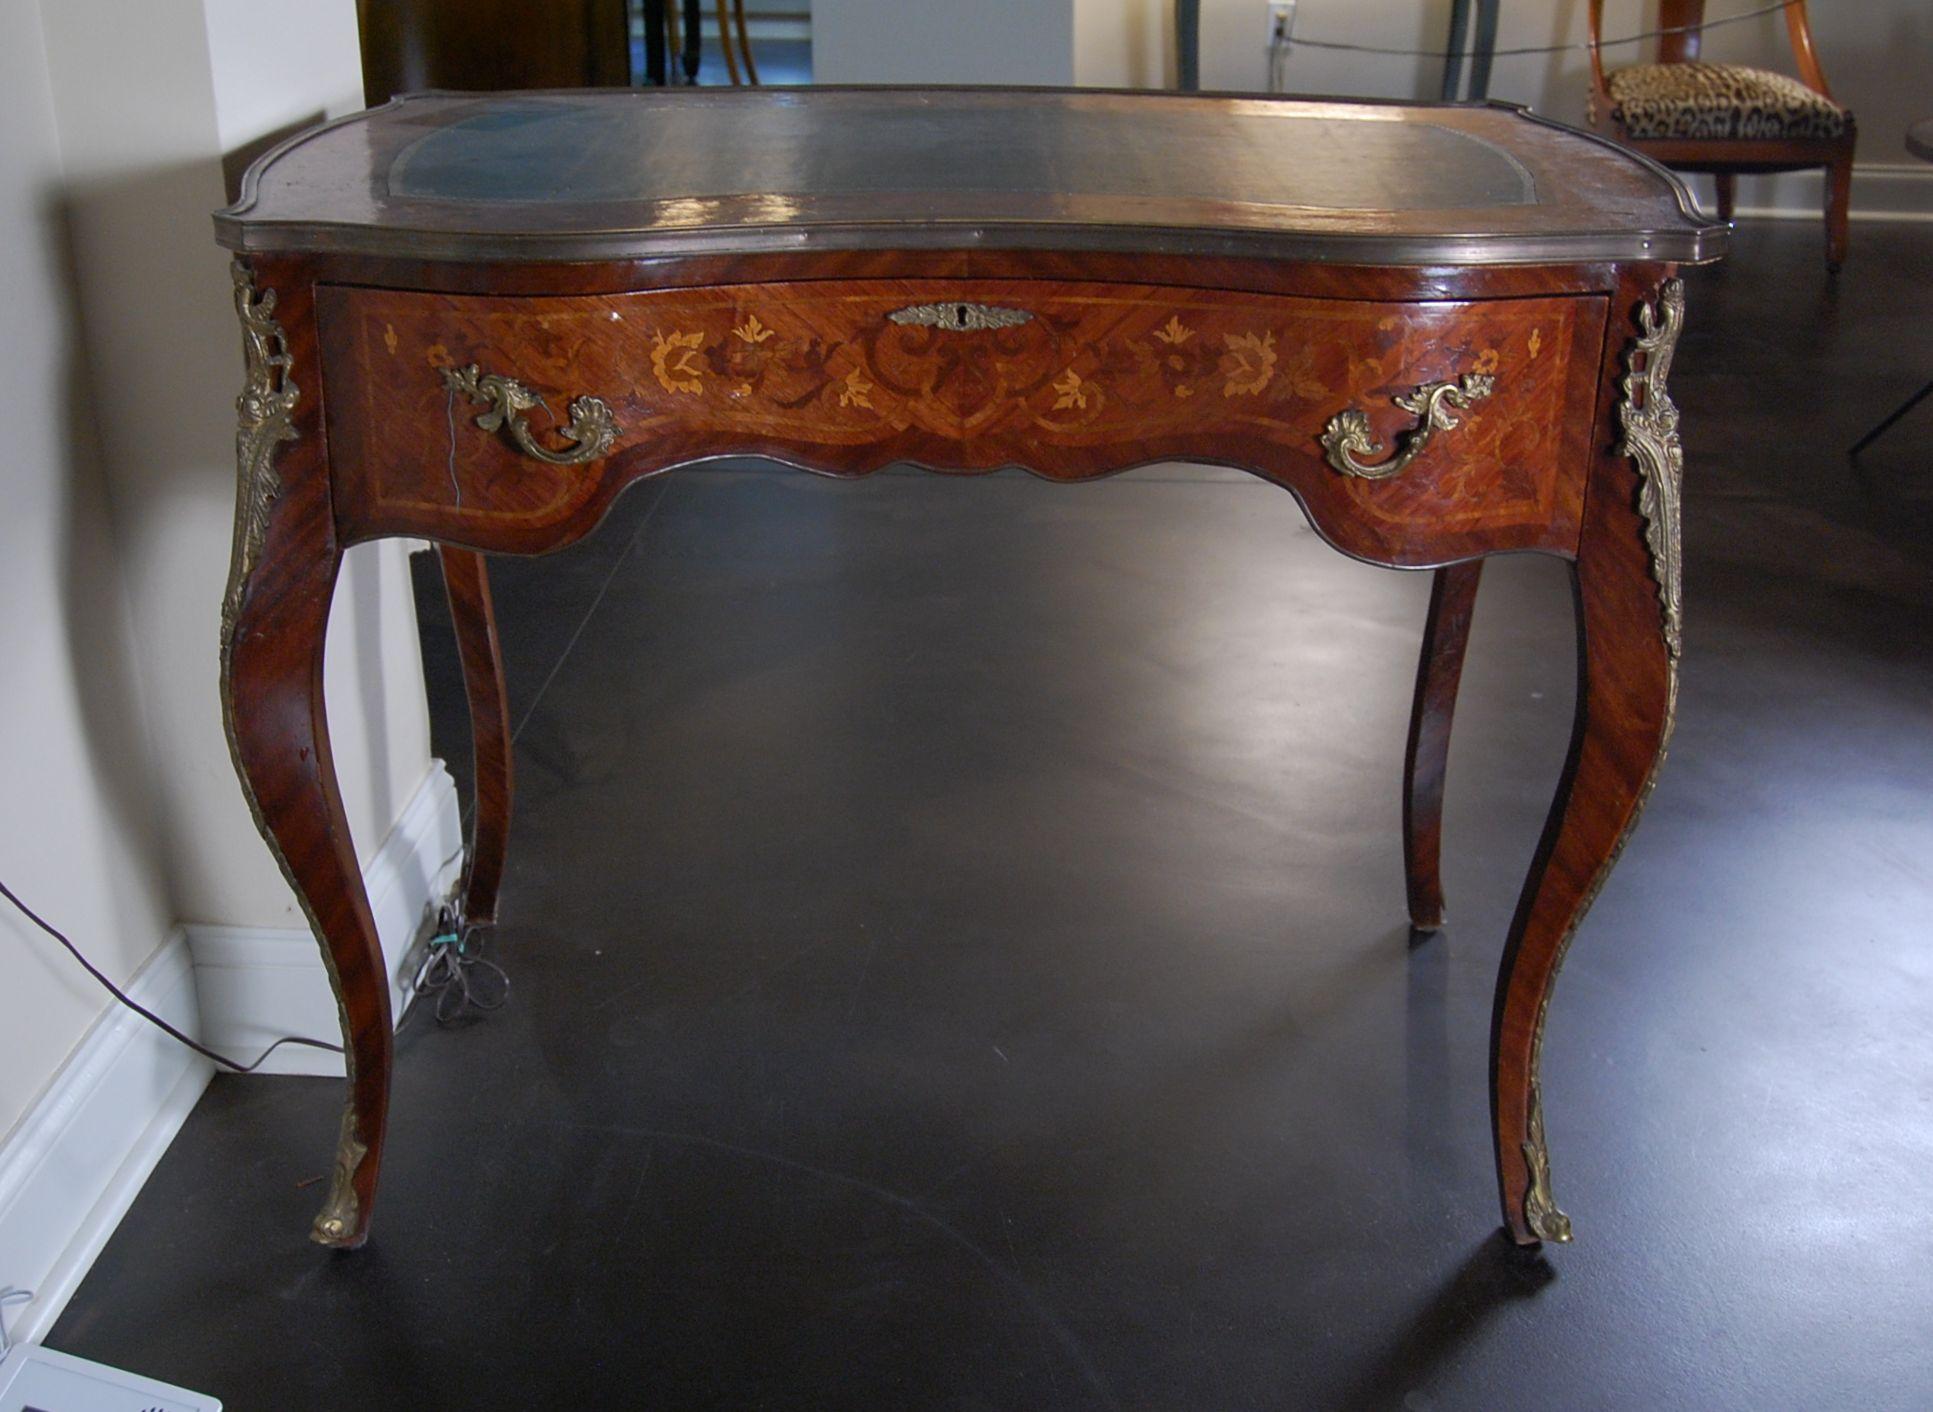 A very nice and small writing table with a newer blue leather top, overall good condition.